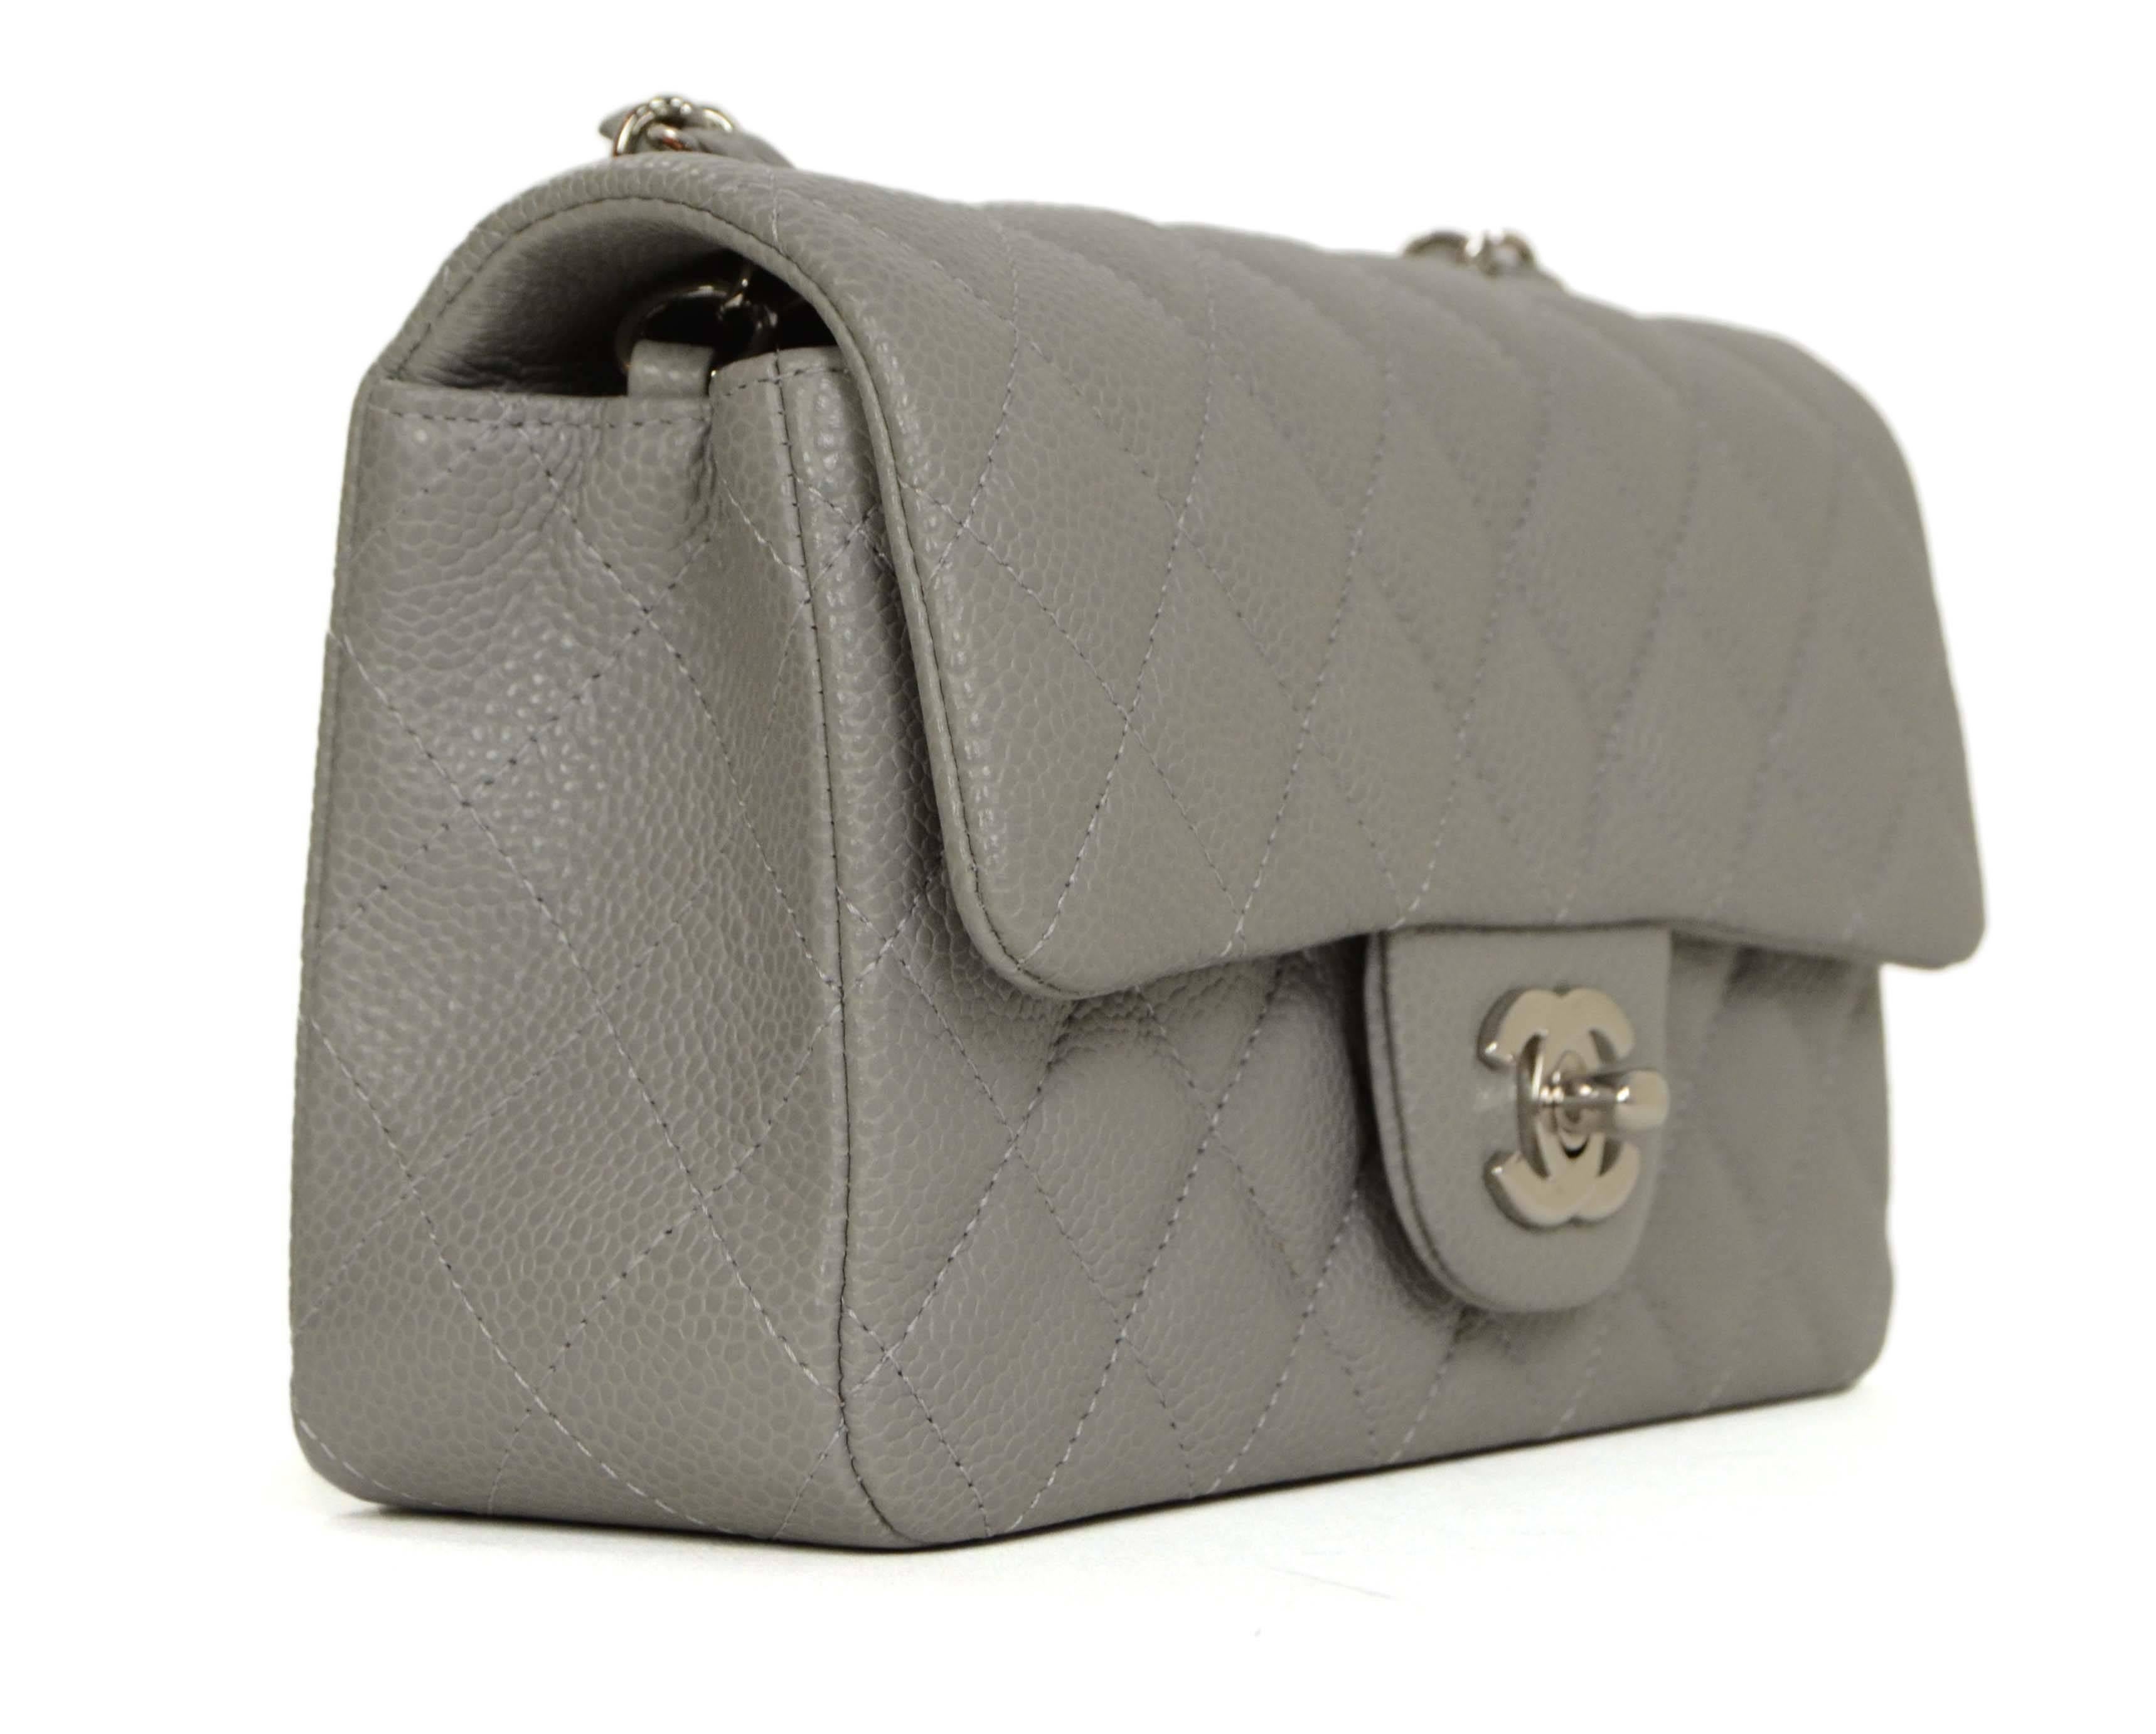 Features leather laced chain and CC twist lock

-Made In: France
-Year Of Production: 2014
-Color: Light grey
-Hardware: Silvertone
-Materials: Caviar leather
-Lining: Grey leather
-Closure/Opening: Flap top with CC twist lock